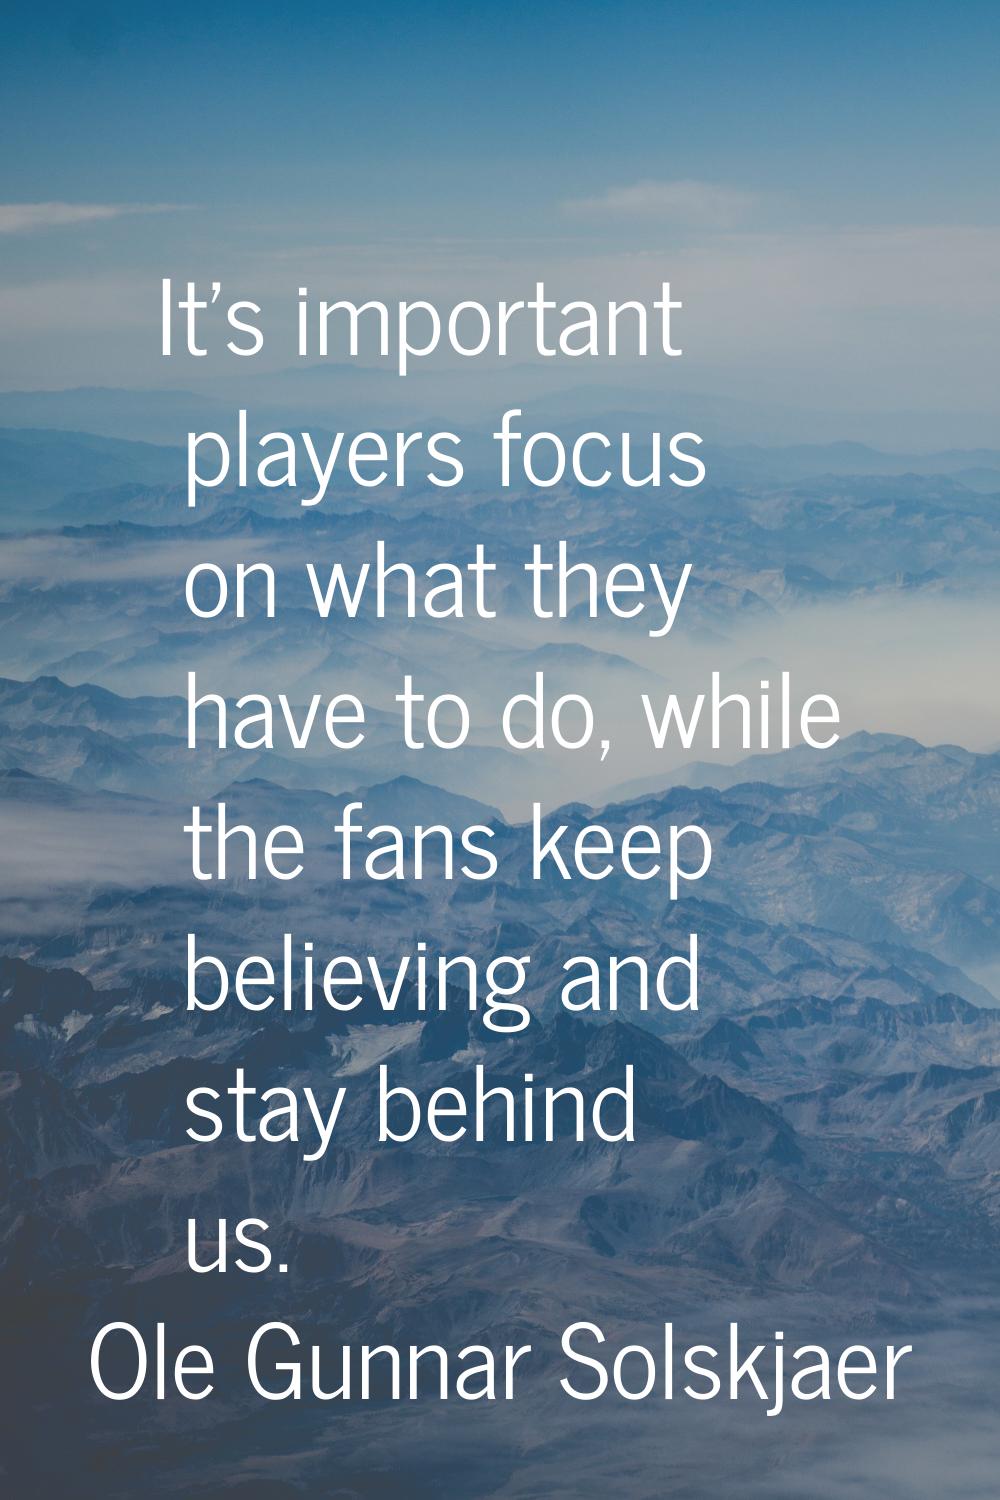 It's important players focus on what they have to do, while the fans keep believing and stay behind